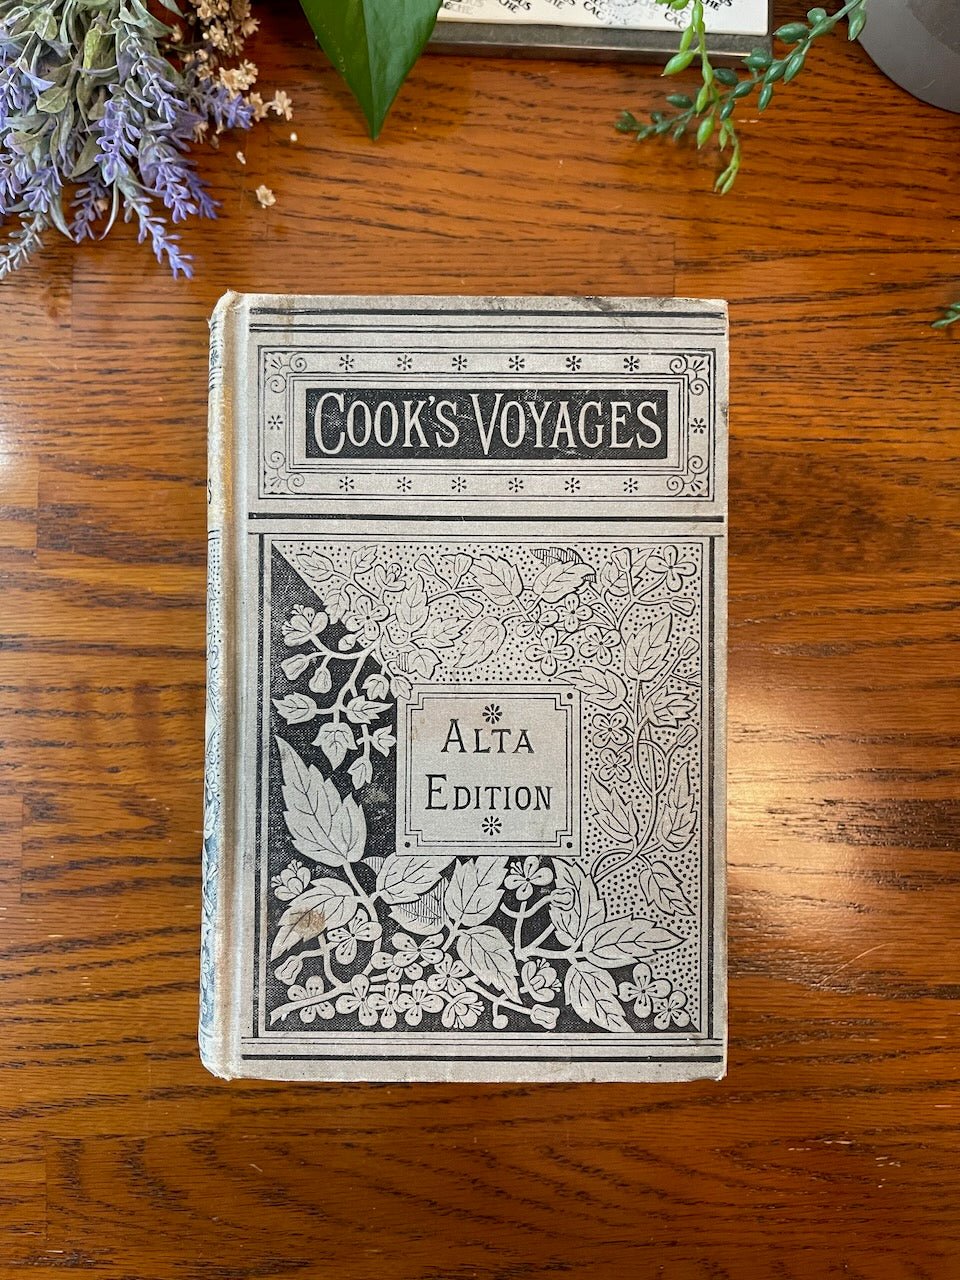 A Narrative of the Voyages Round the World by Capt James Cook / ca. 1880 - Precious Cache